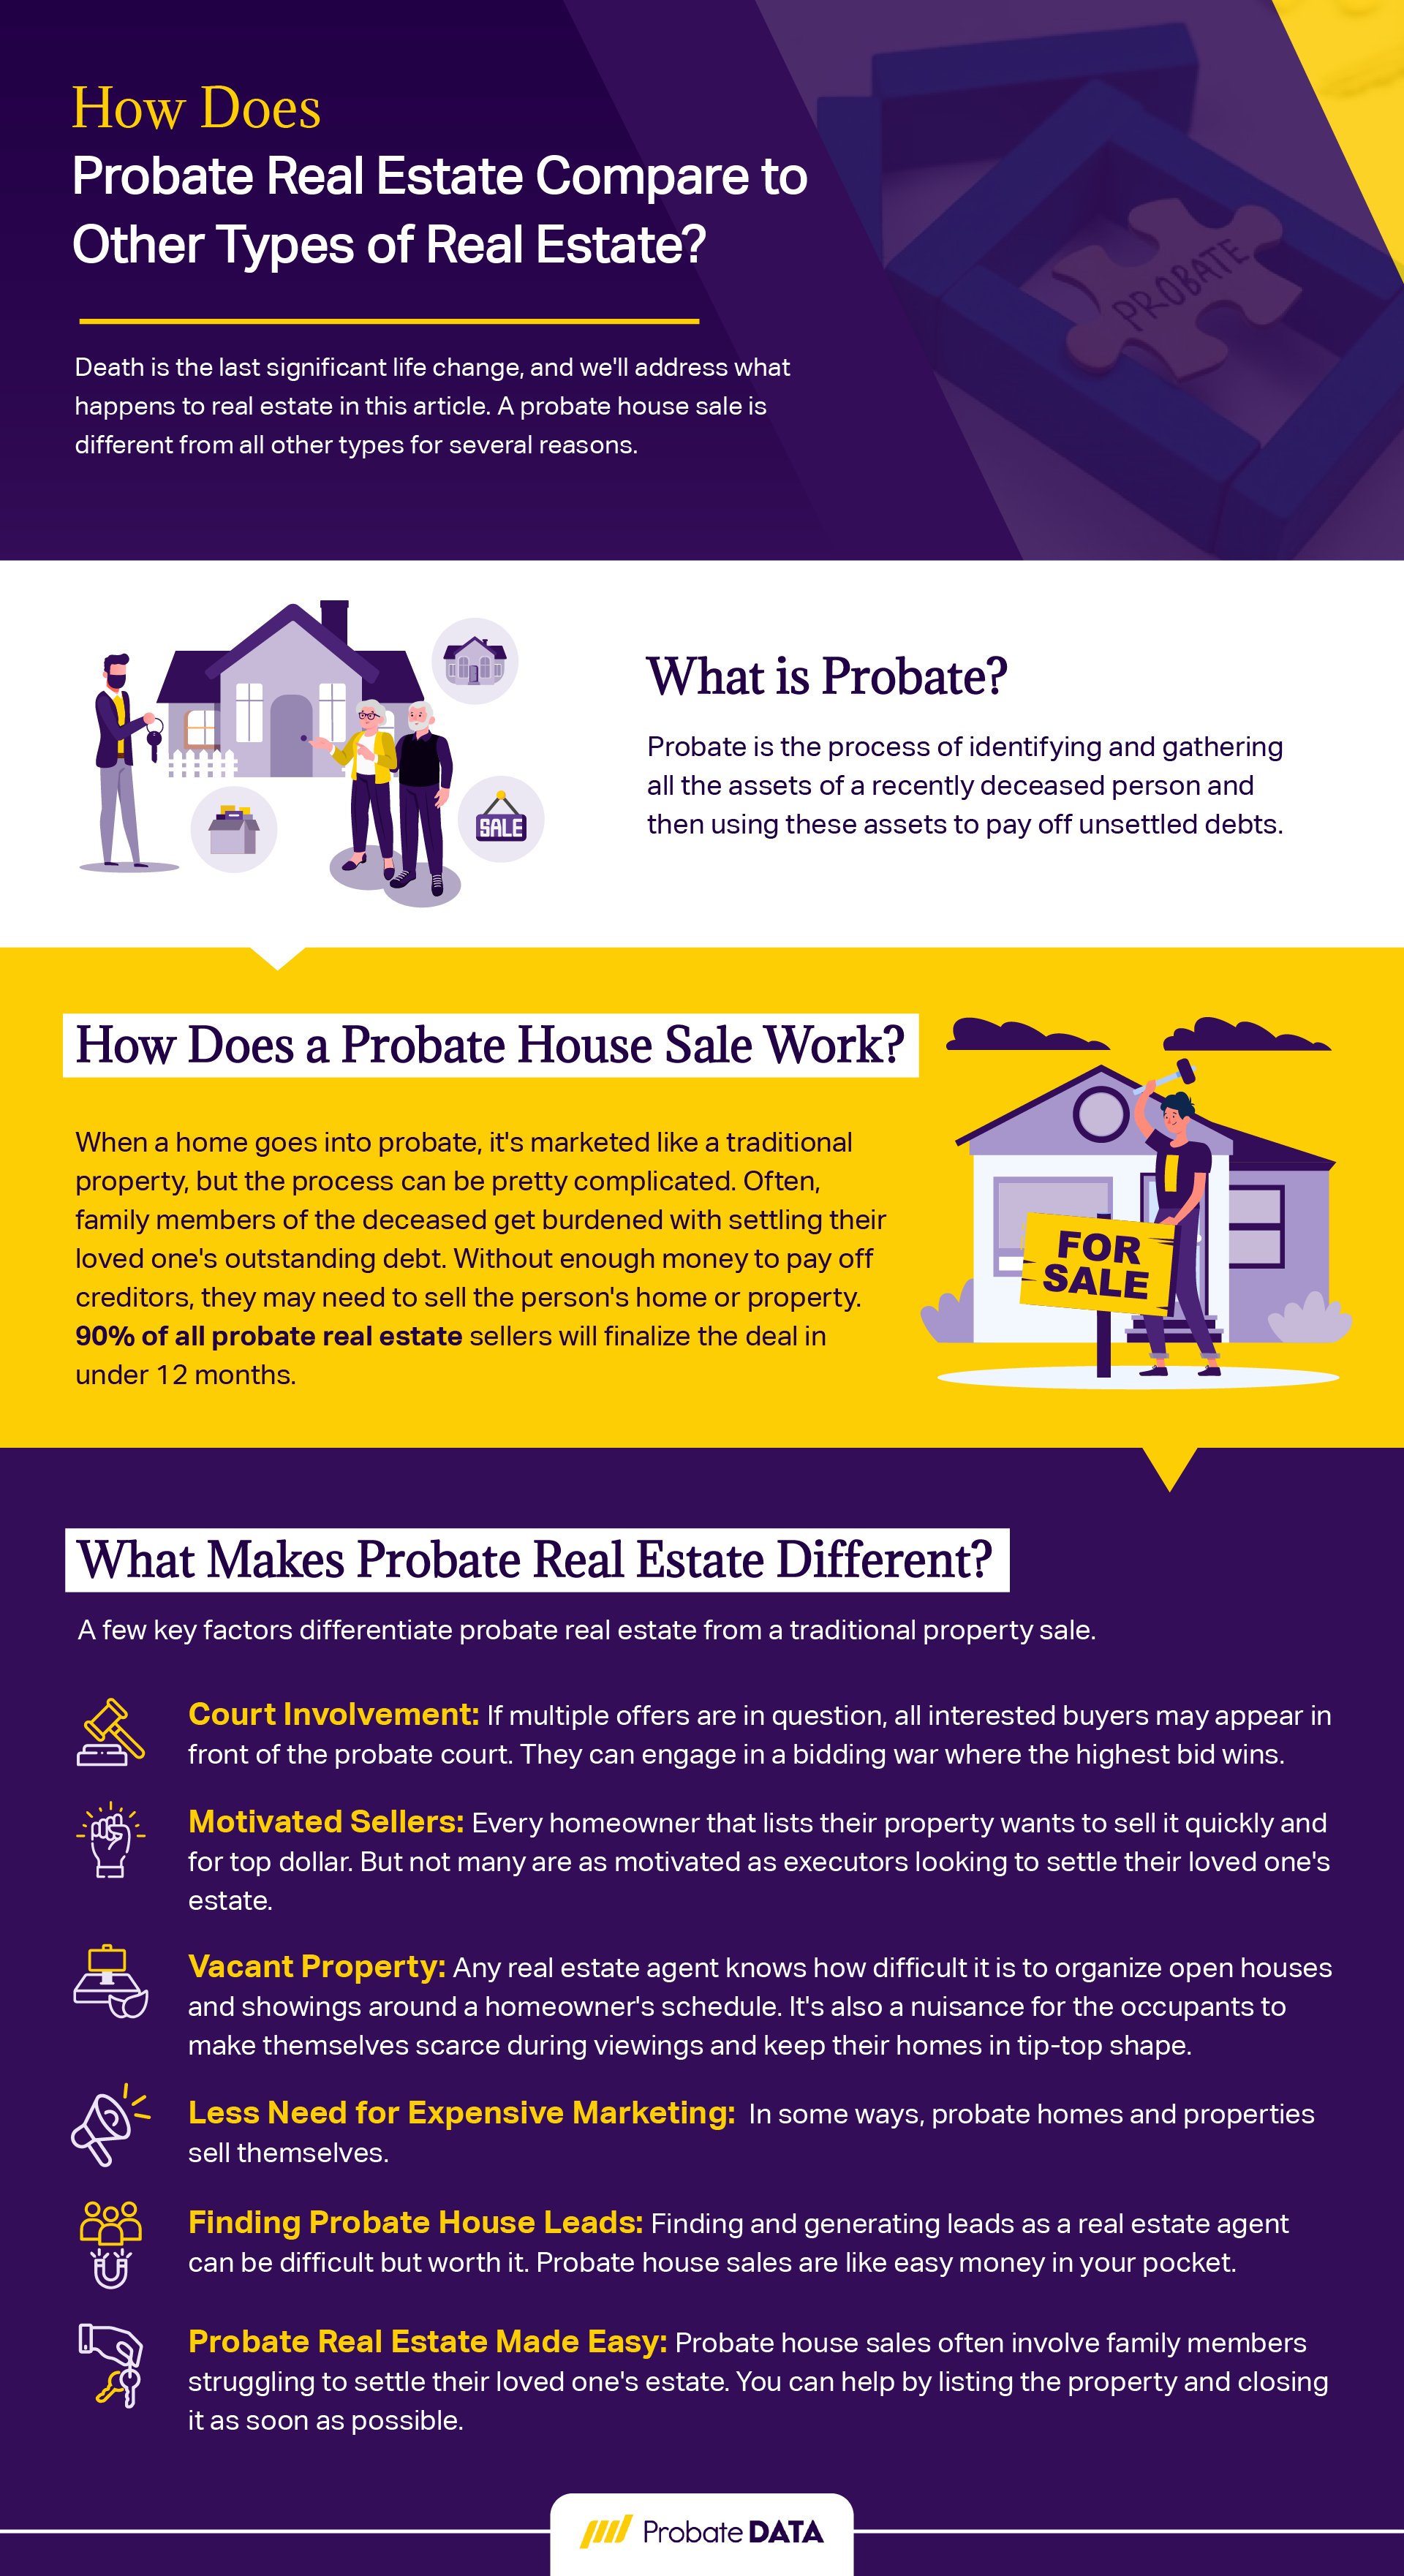 How Does Probate Real Estate Compare to Other Types of Real Estate Infographic FINAL